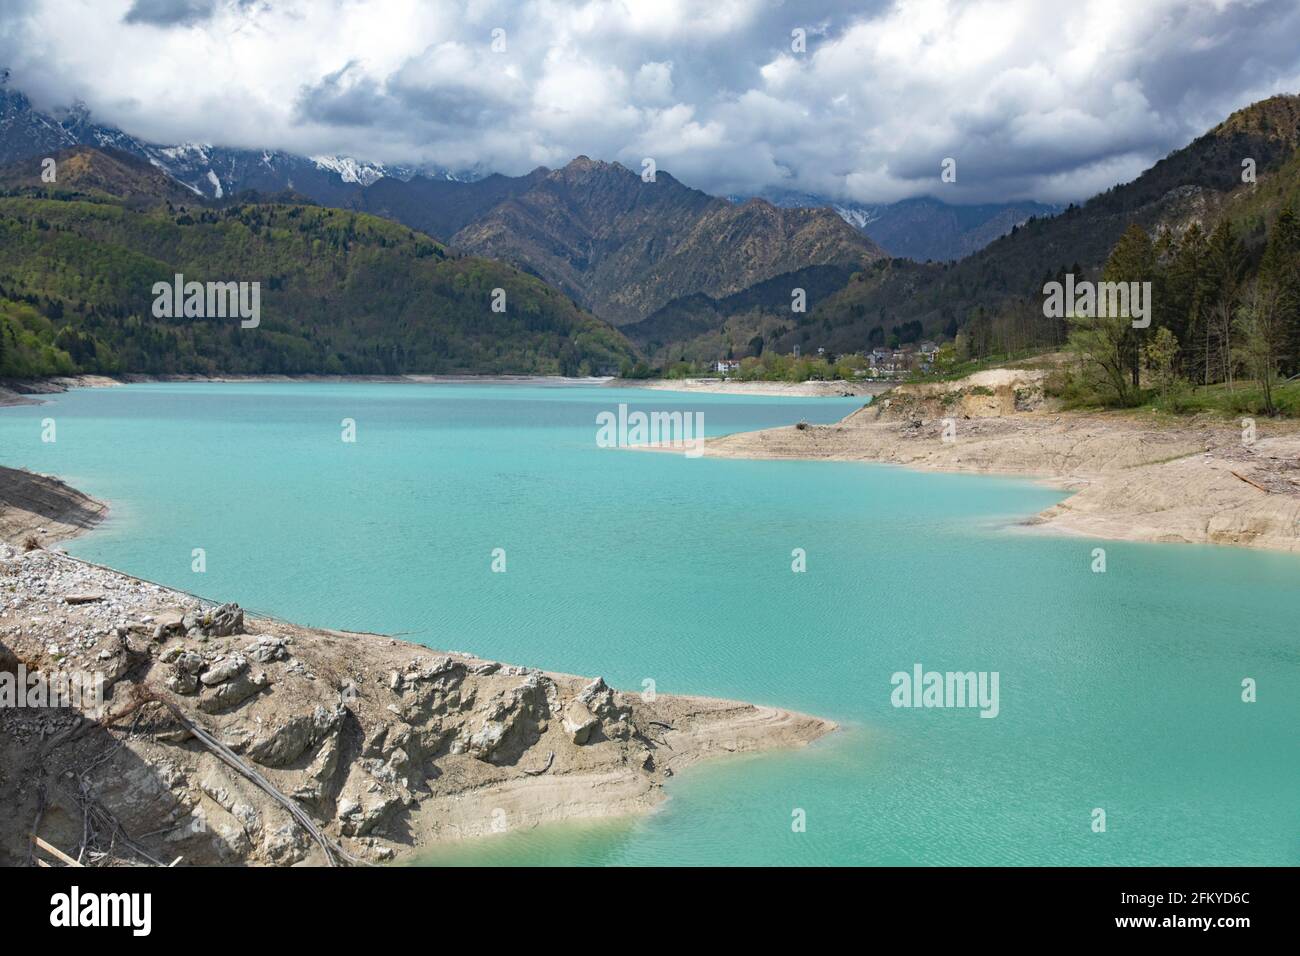 Barcis alpine lake with cloudy sky at Valcellina-Pordenone,Italy attractions on Dolomites Stock Photo